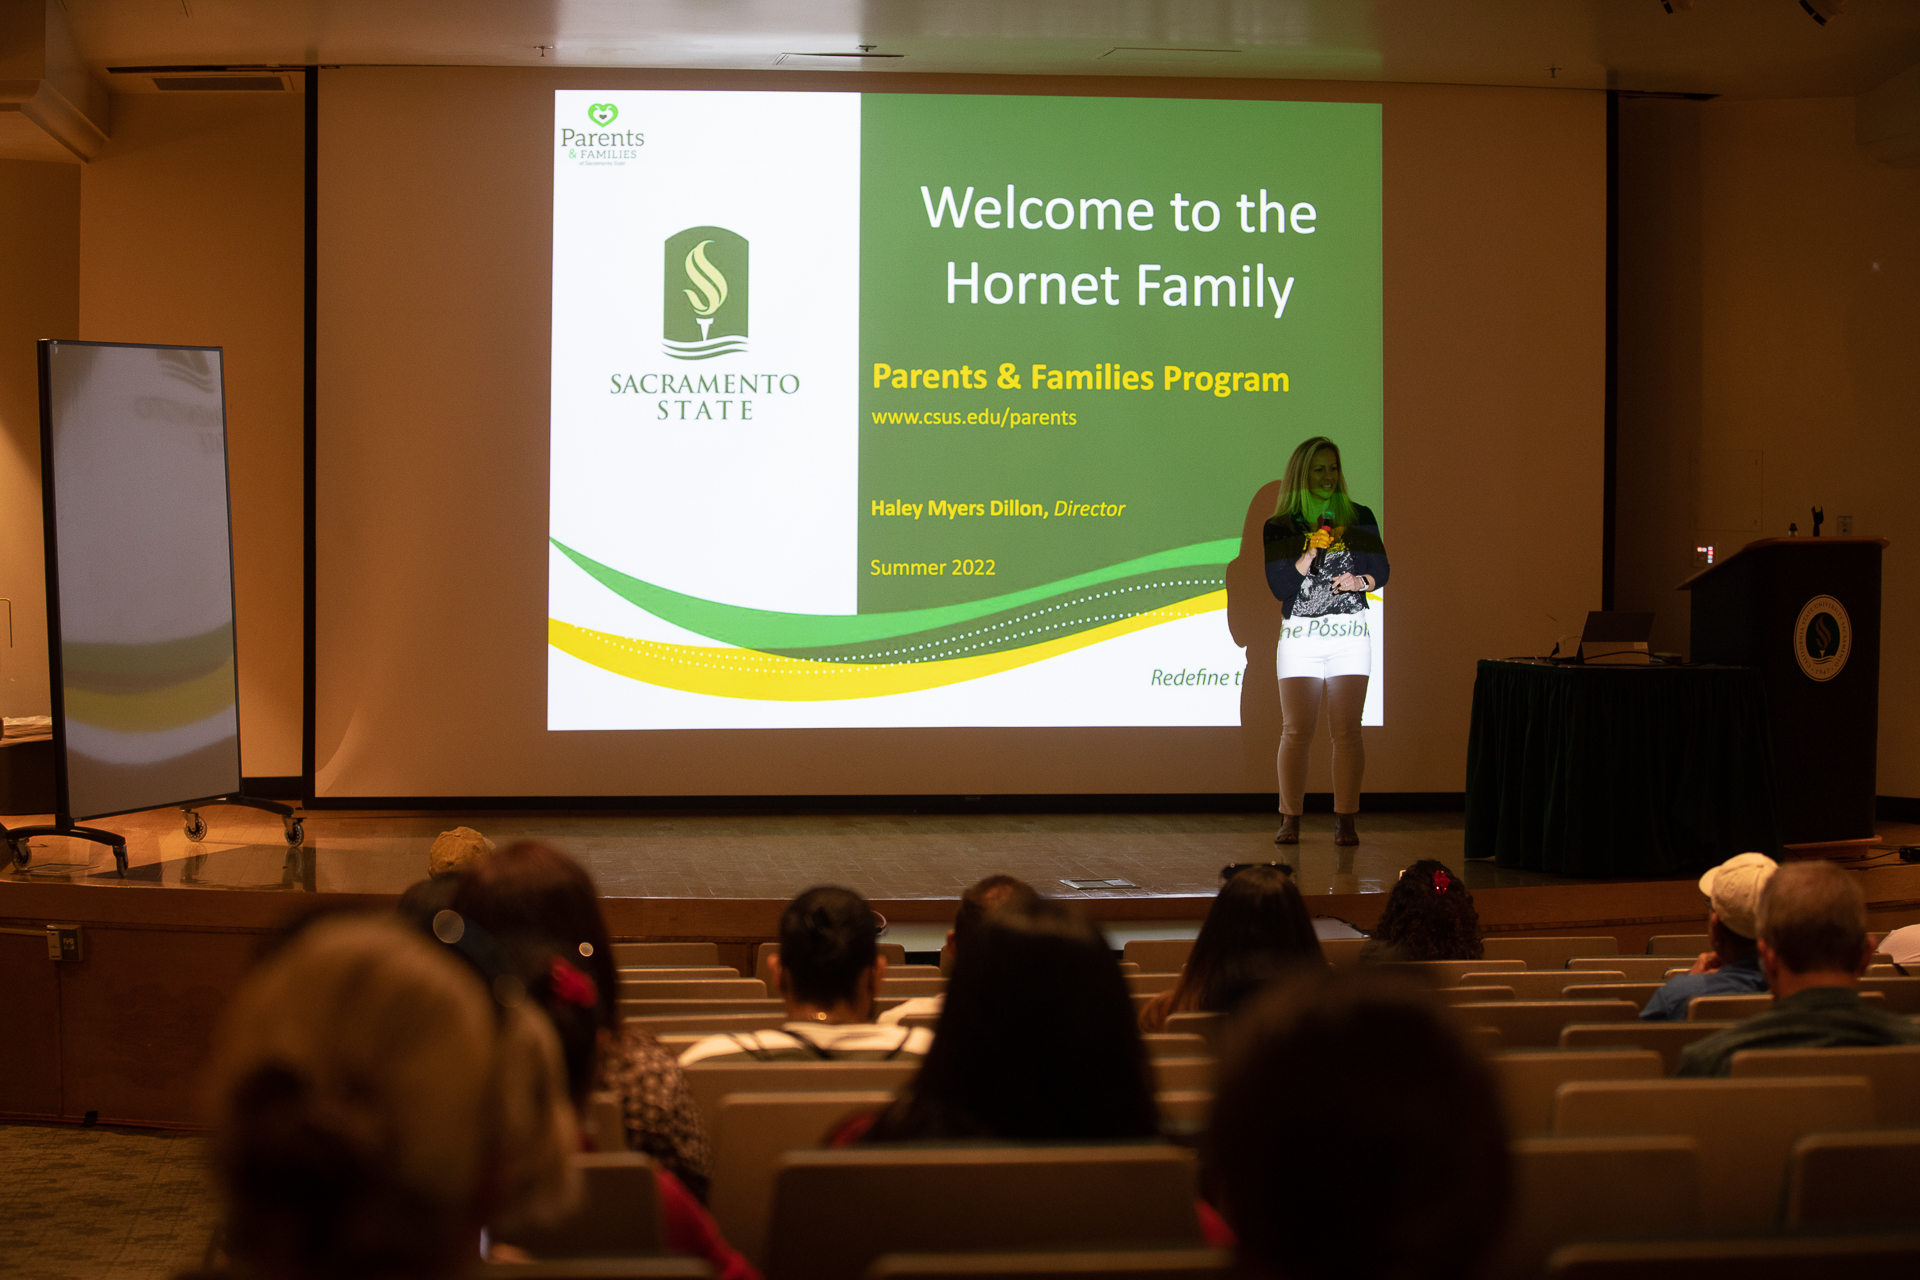 Haley Myers Dillon, standing on a stage in front of an audience, while a screen displays a slide reading "Welcome to the Hornet Family."